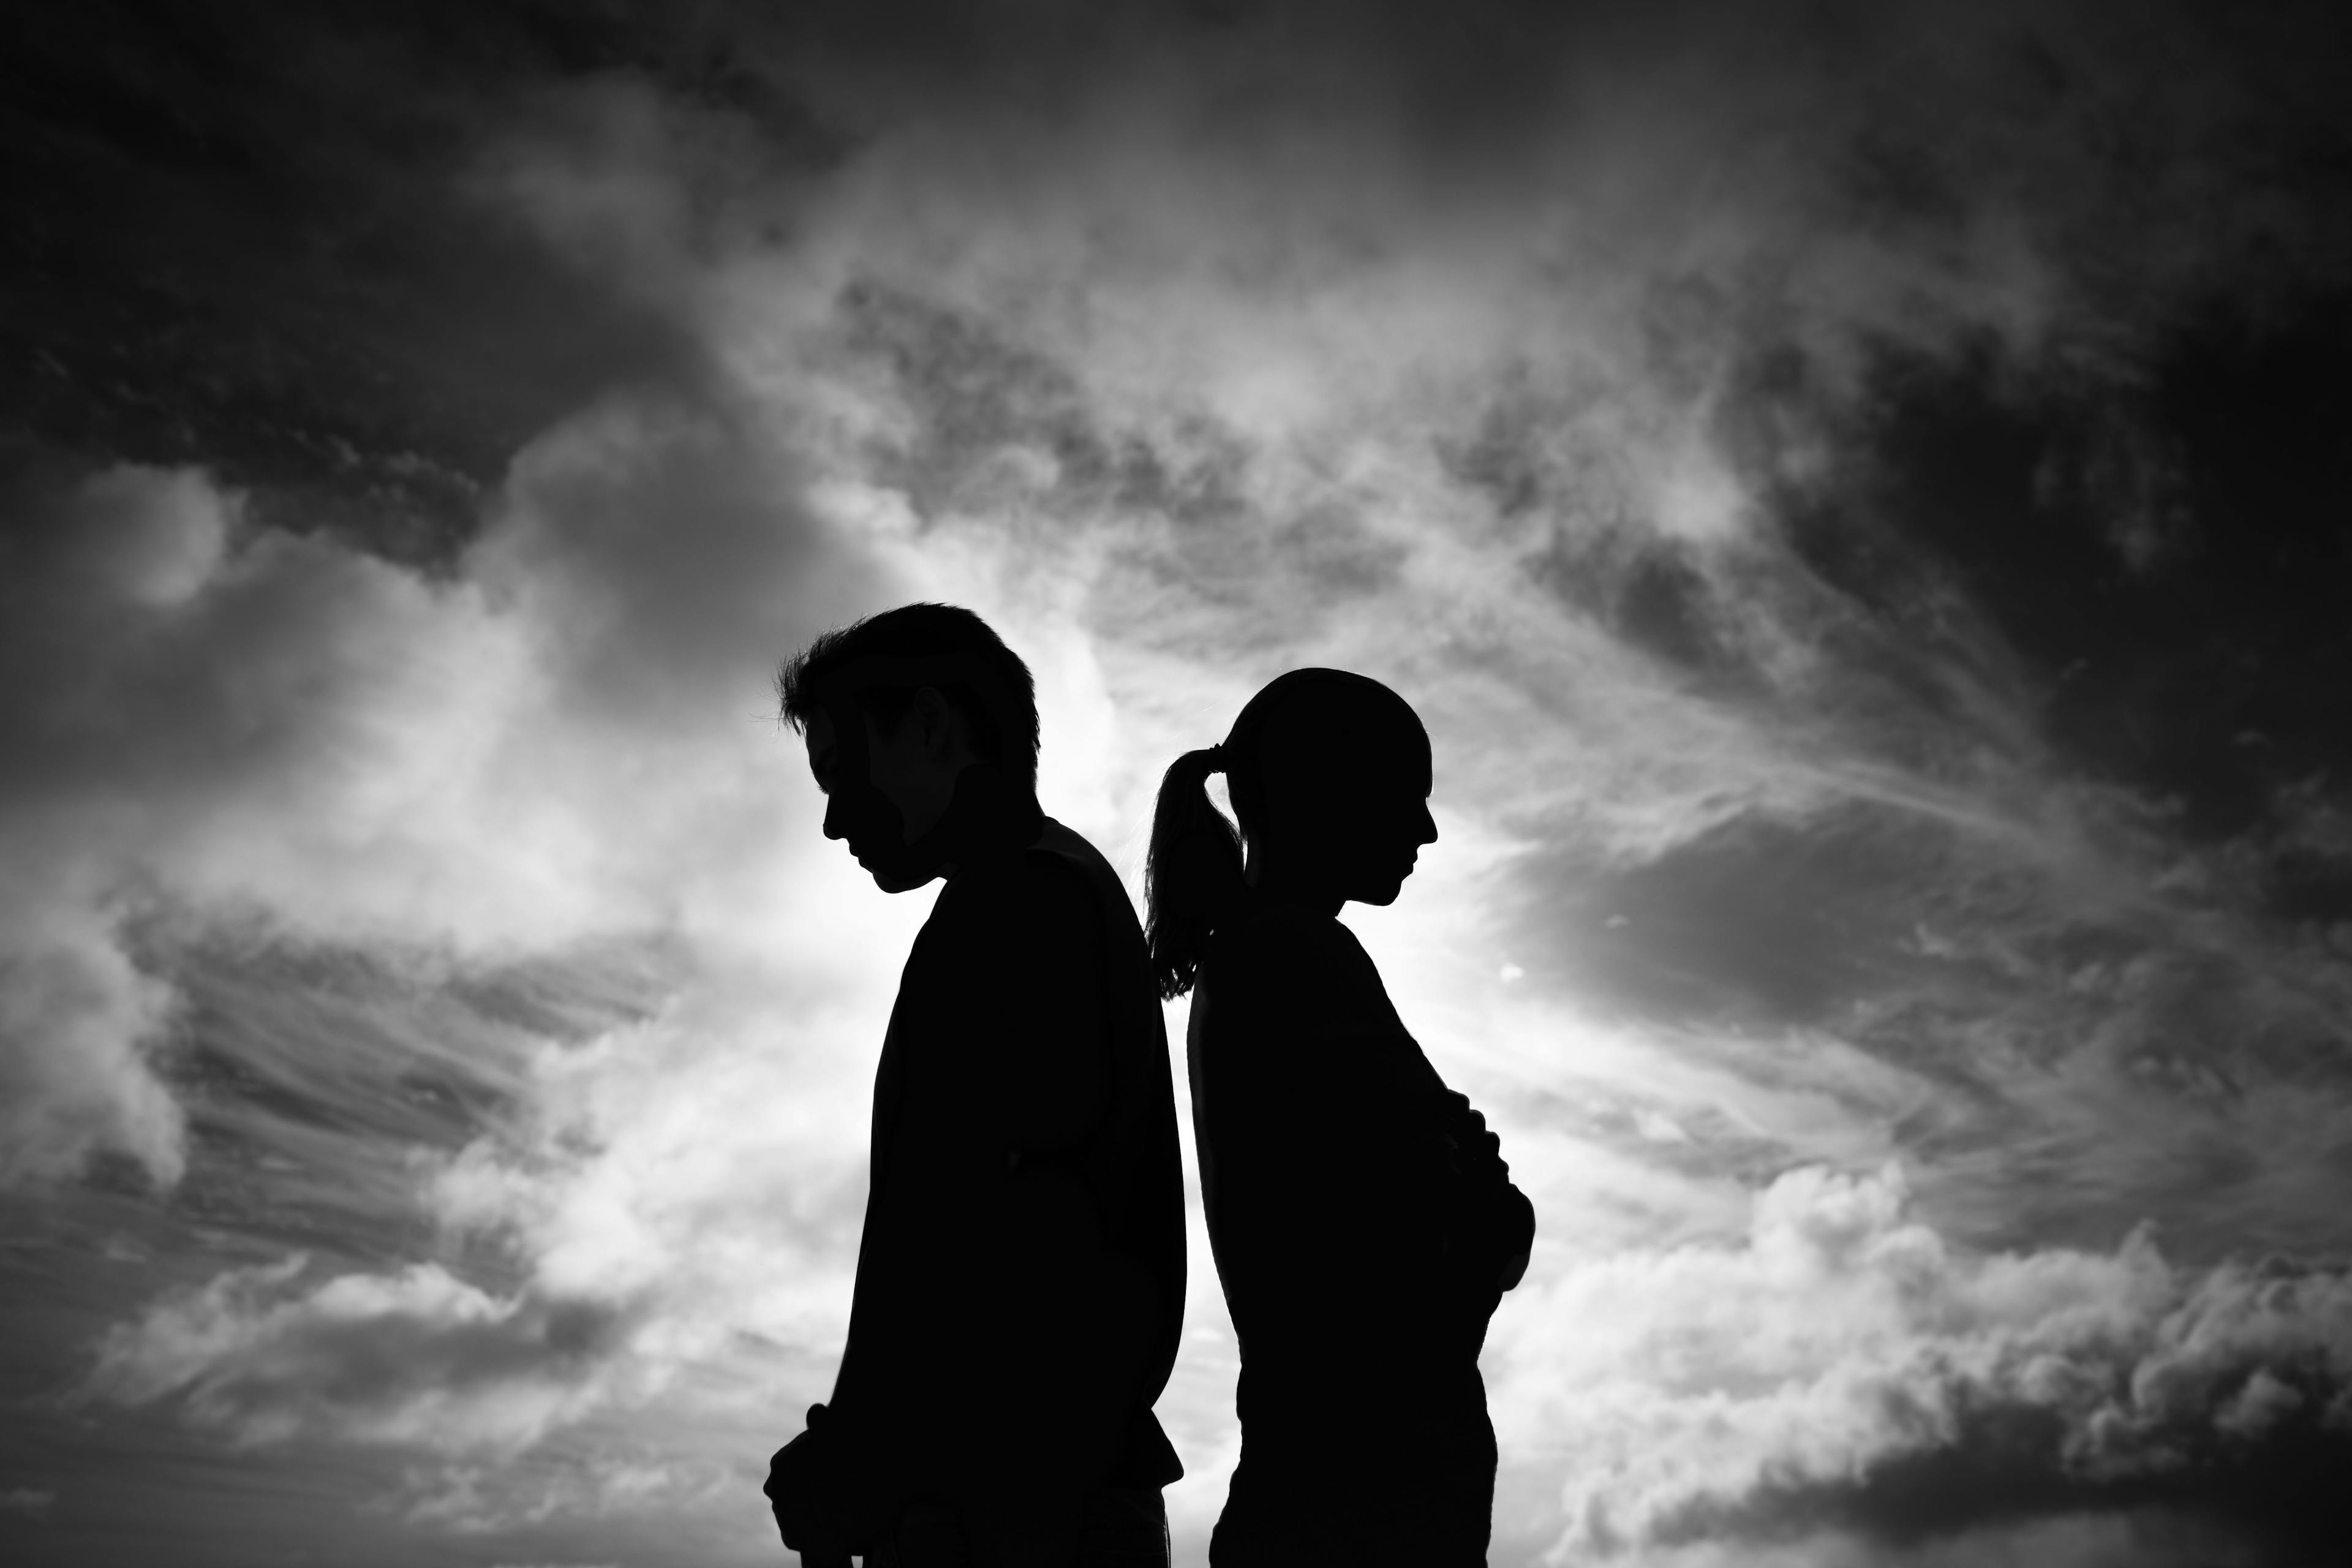 Study Shows Pandemic Resulted in Increases in Intimate Partner Aggression